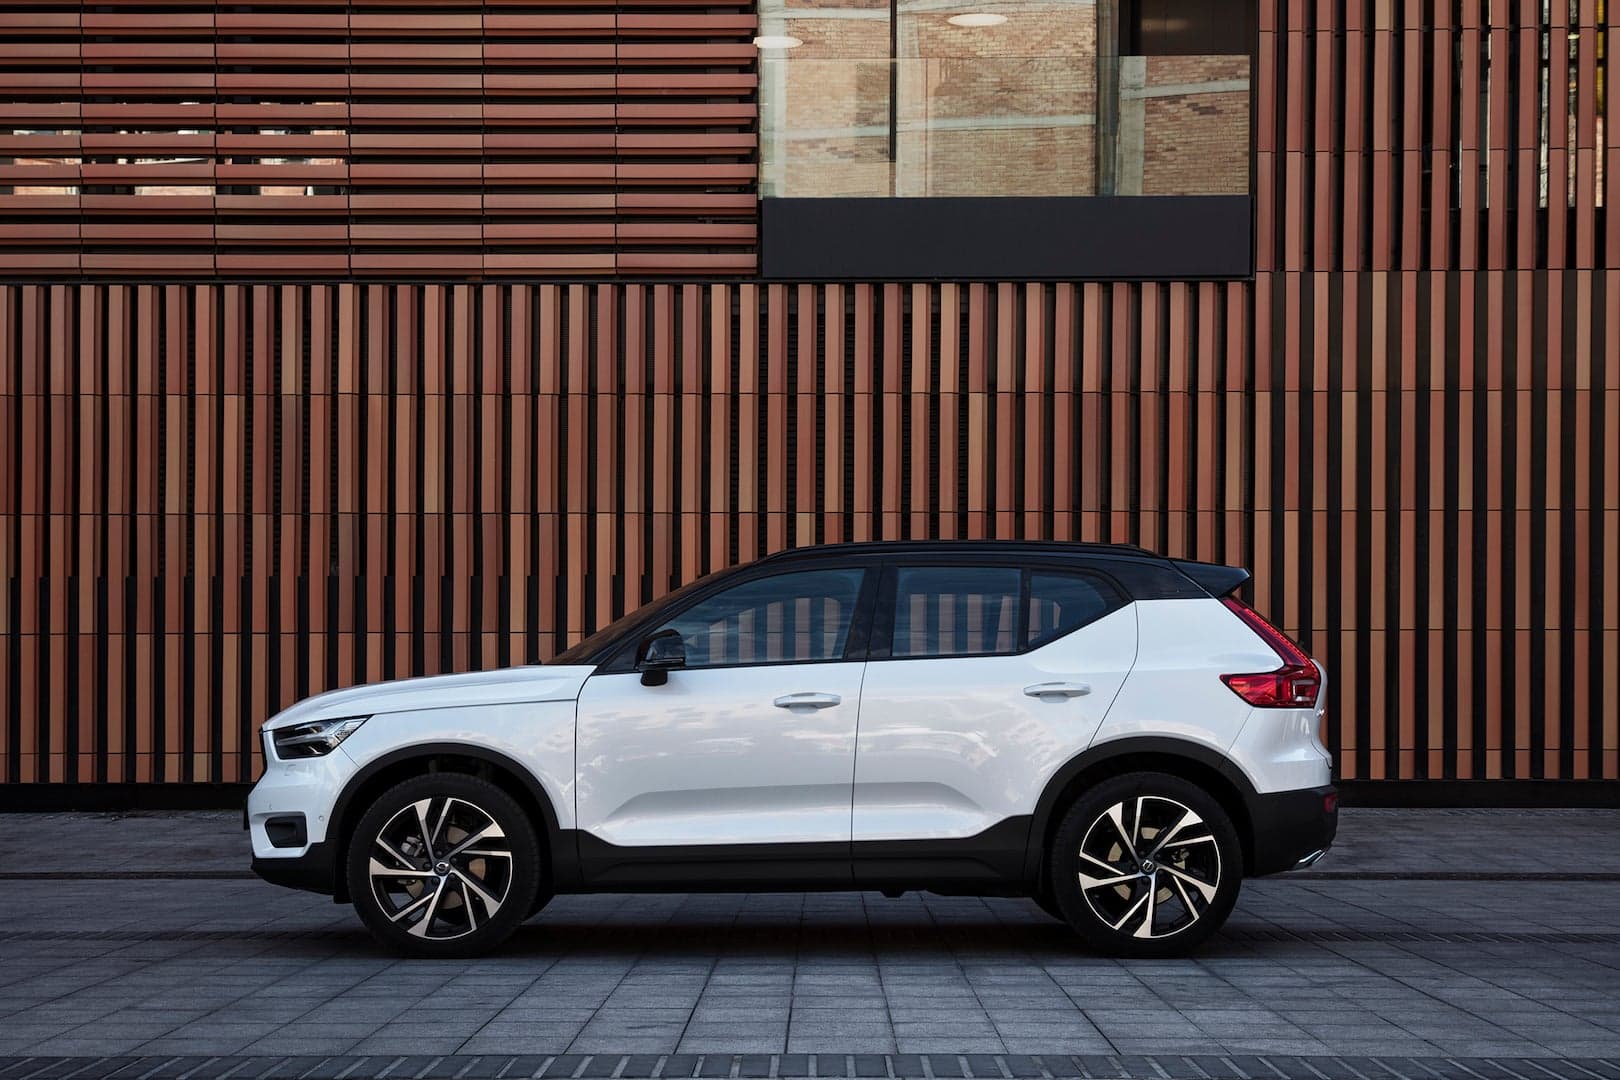 2019 Volvo XC40 Review: Can This Crossover Redeem an Entire Segment?